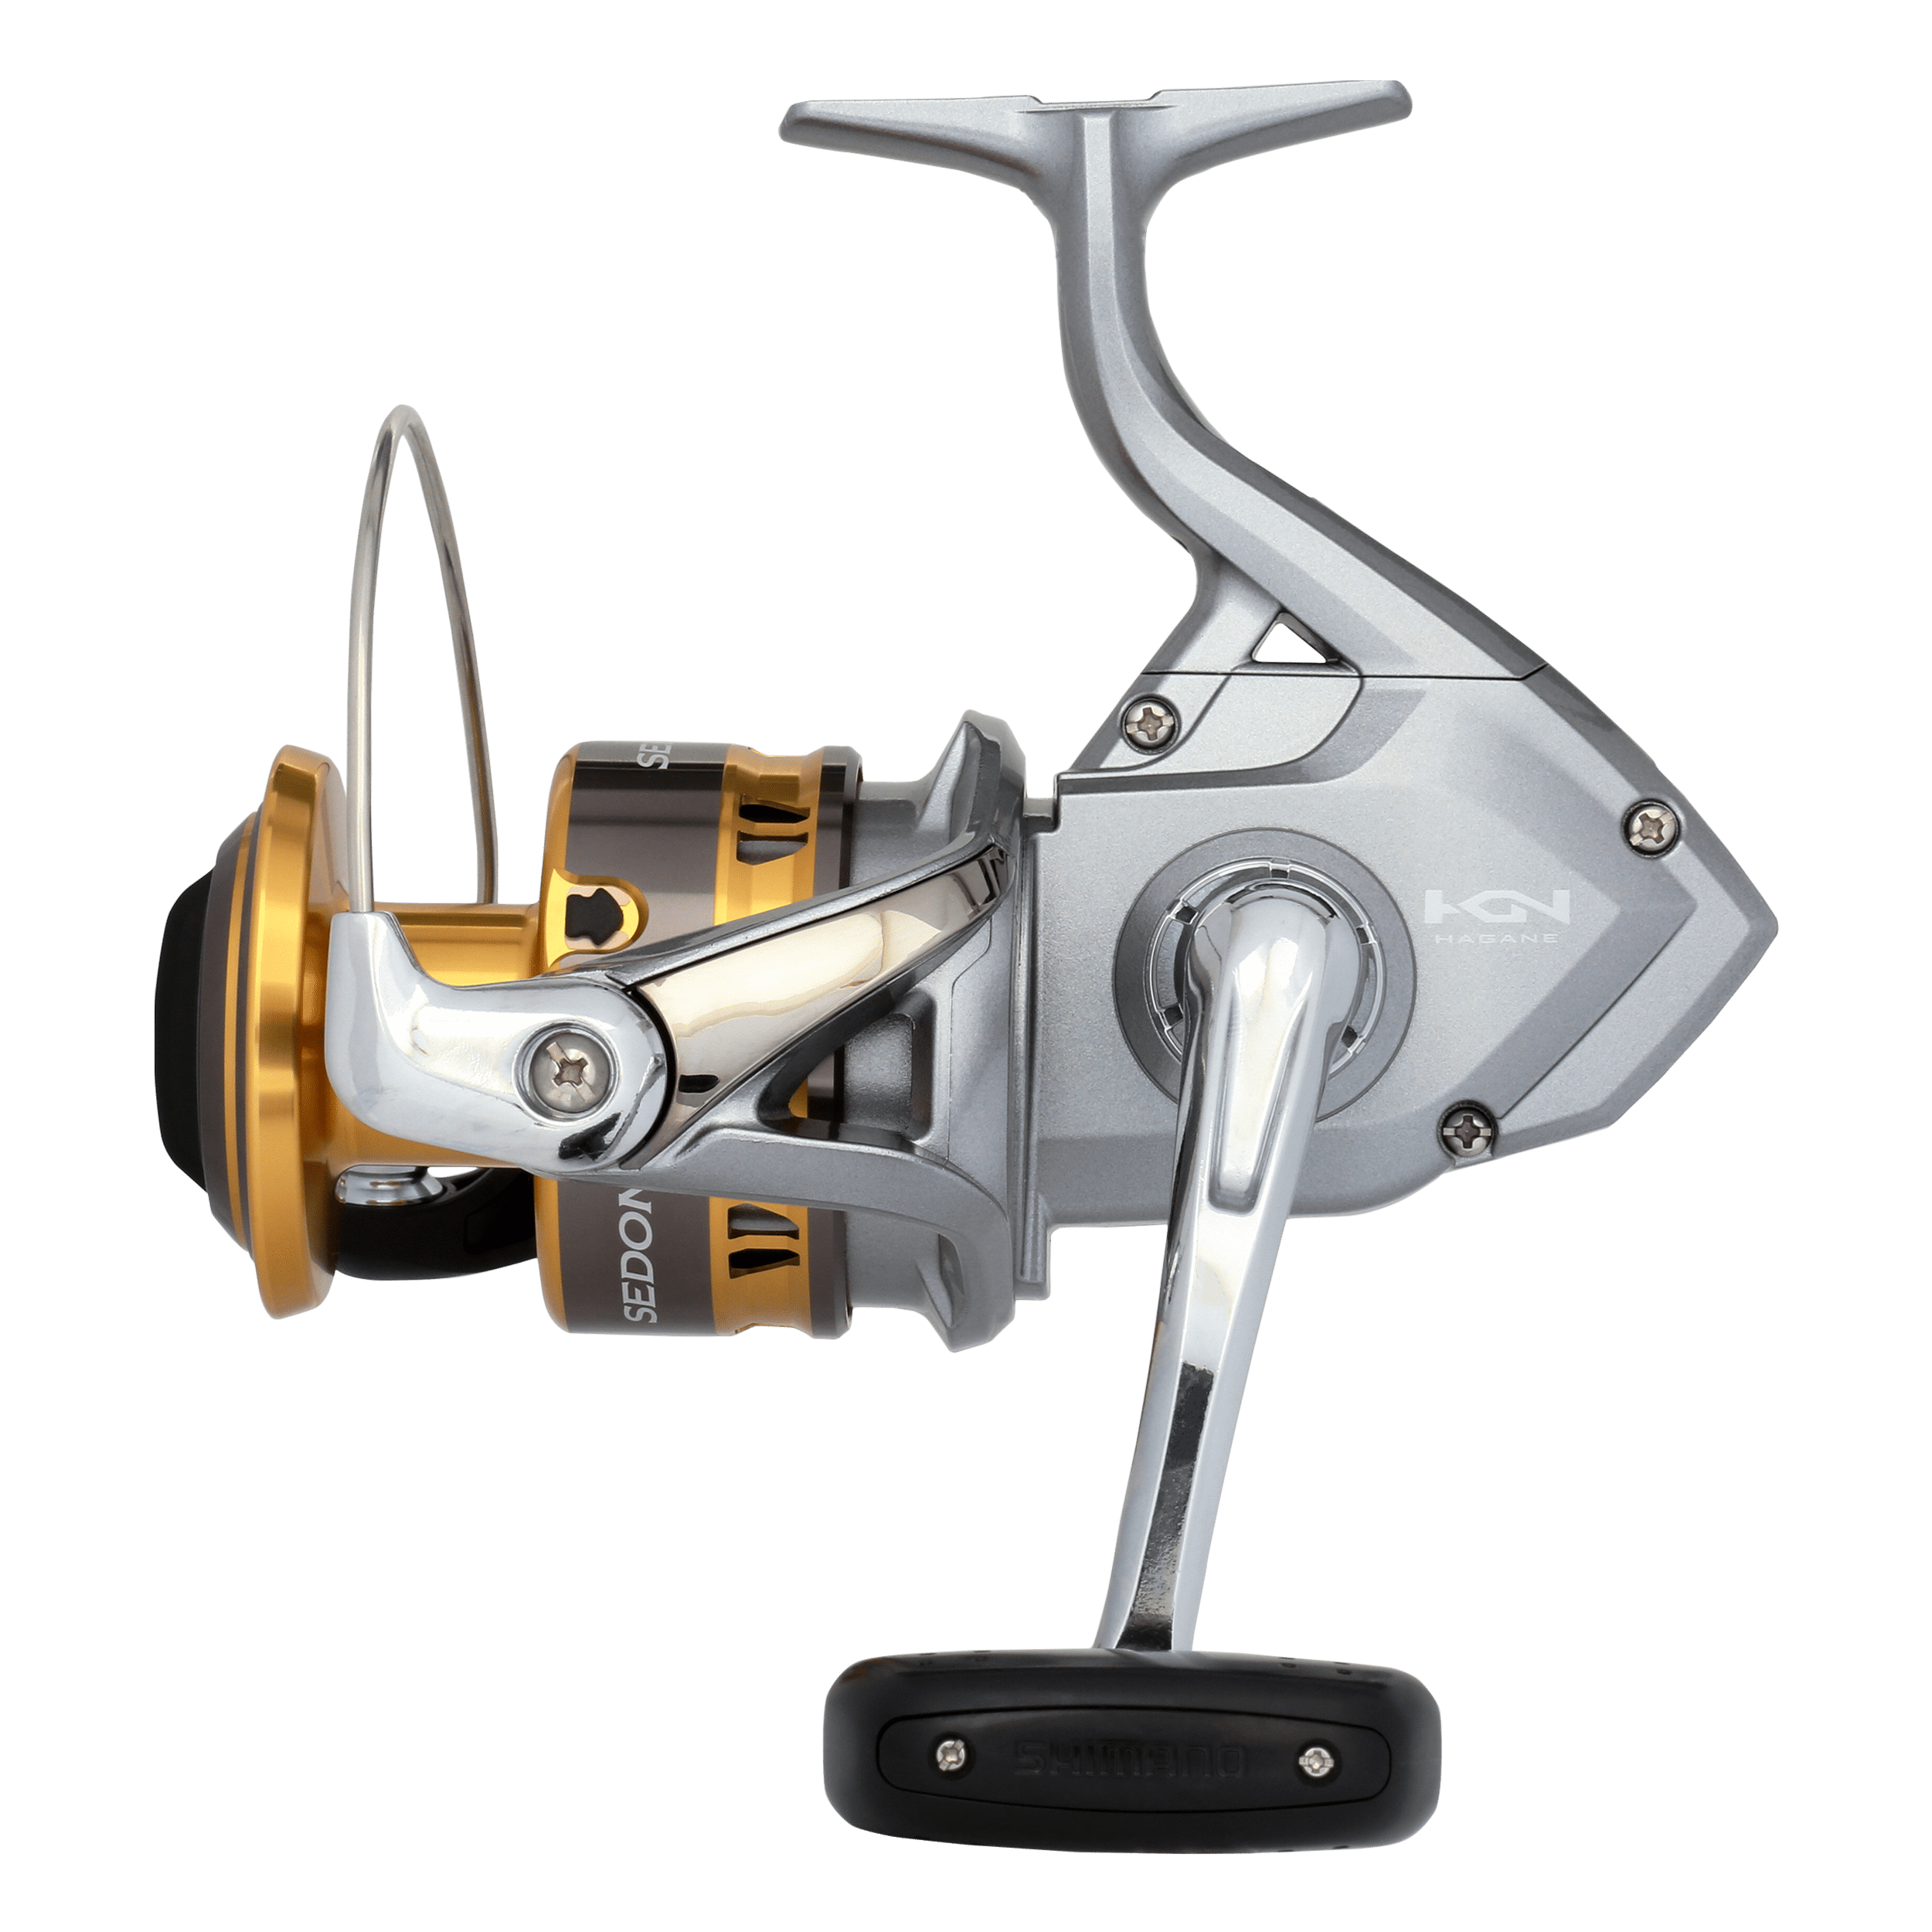 Shimano Sedona C3000 FI, Spinning reel with front drag, Signs of